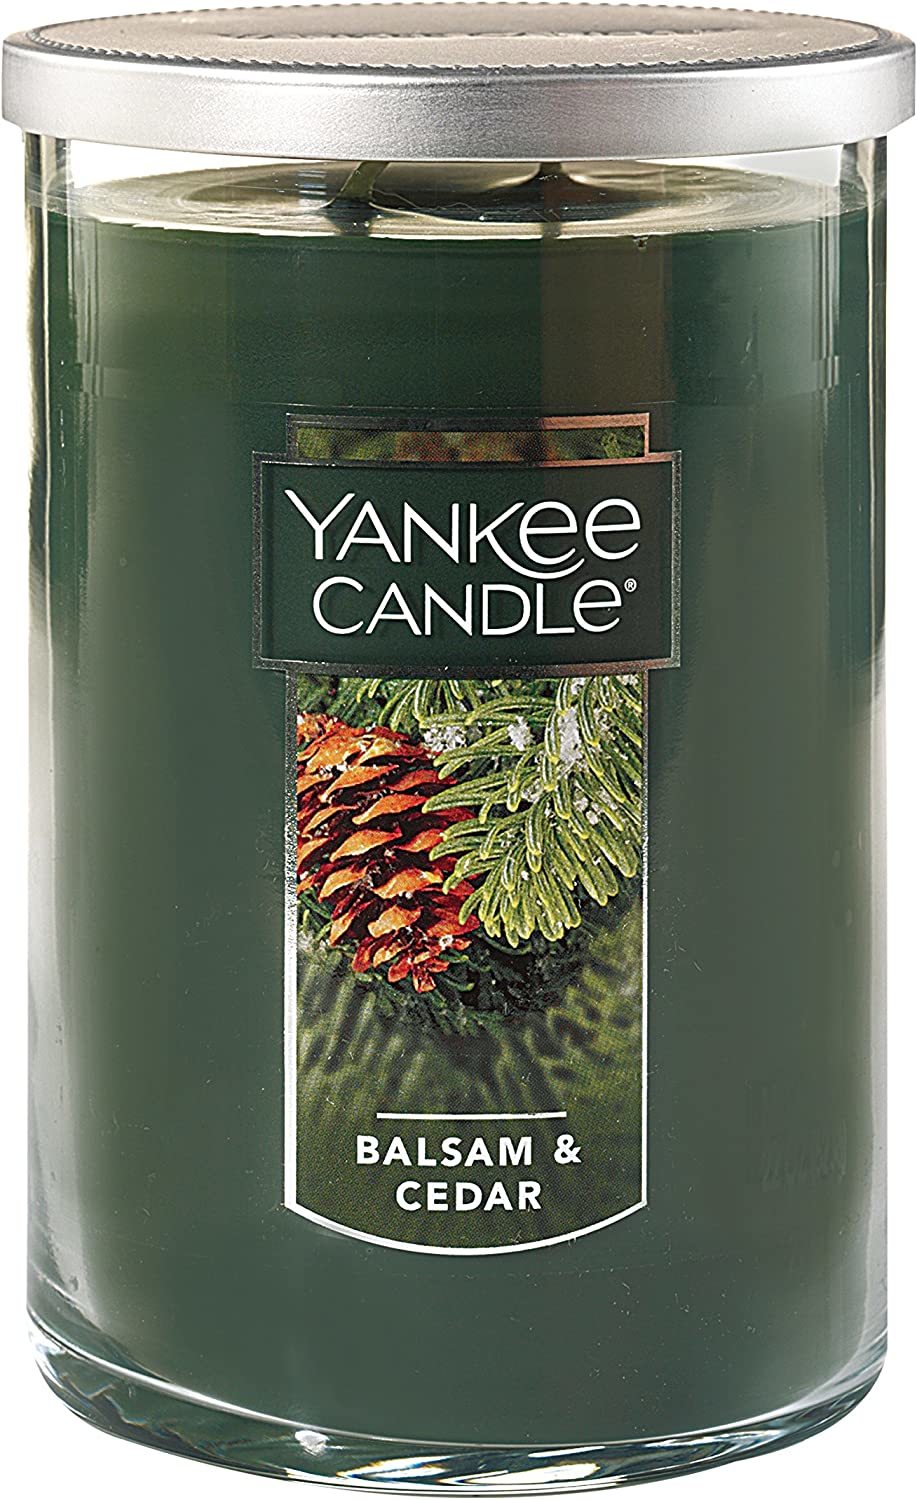 Primary image for Yankee Candle Balsam & Cedar Scented, Classic 22Oz Large Tumbler 2-Wick Candle,